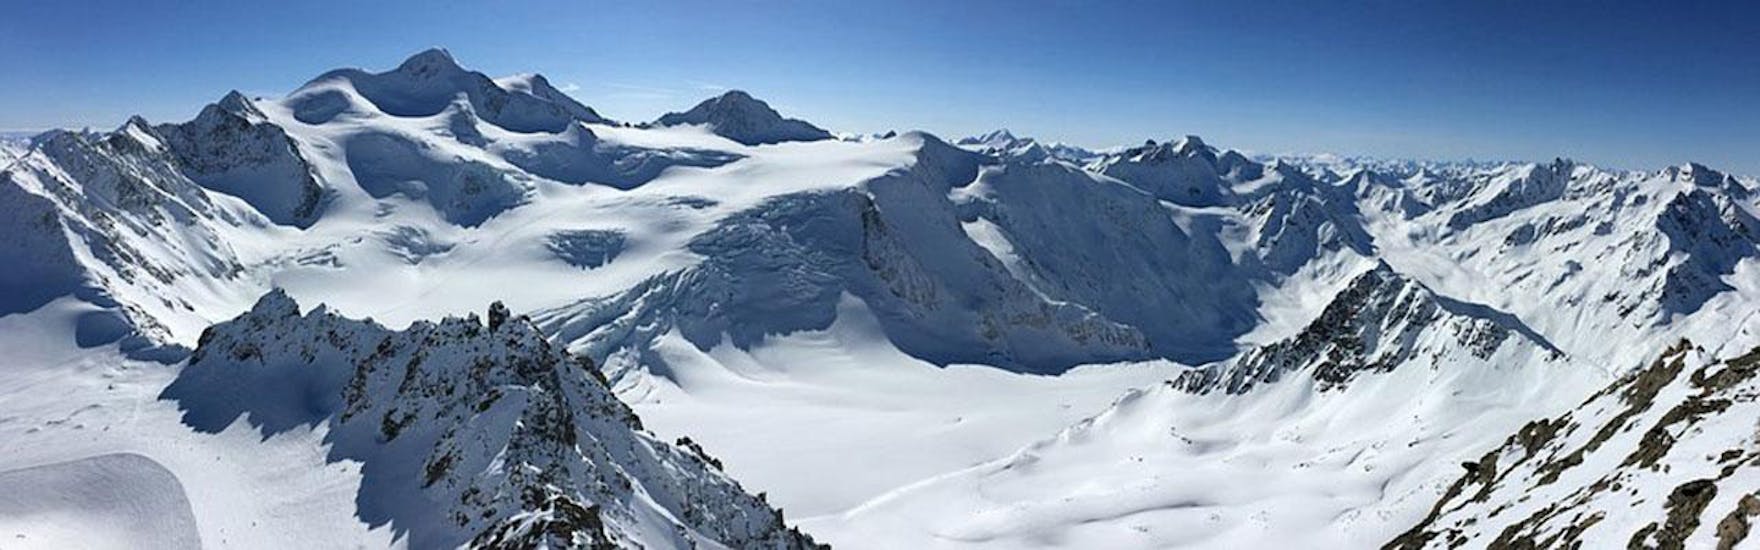 An image of the snow-capped mountains of the Arosa - Lenzerheide ski area in the Swiss mountains, where the ski school ACT Sporst Skischule Arosa offers private ski lessons to kids and adults.